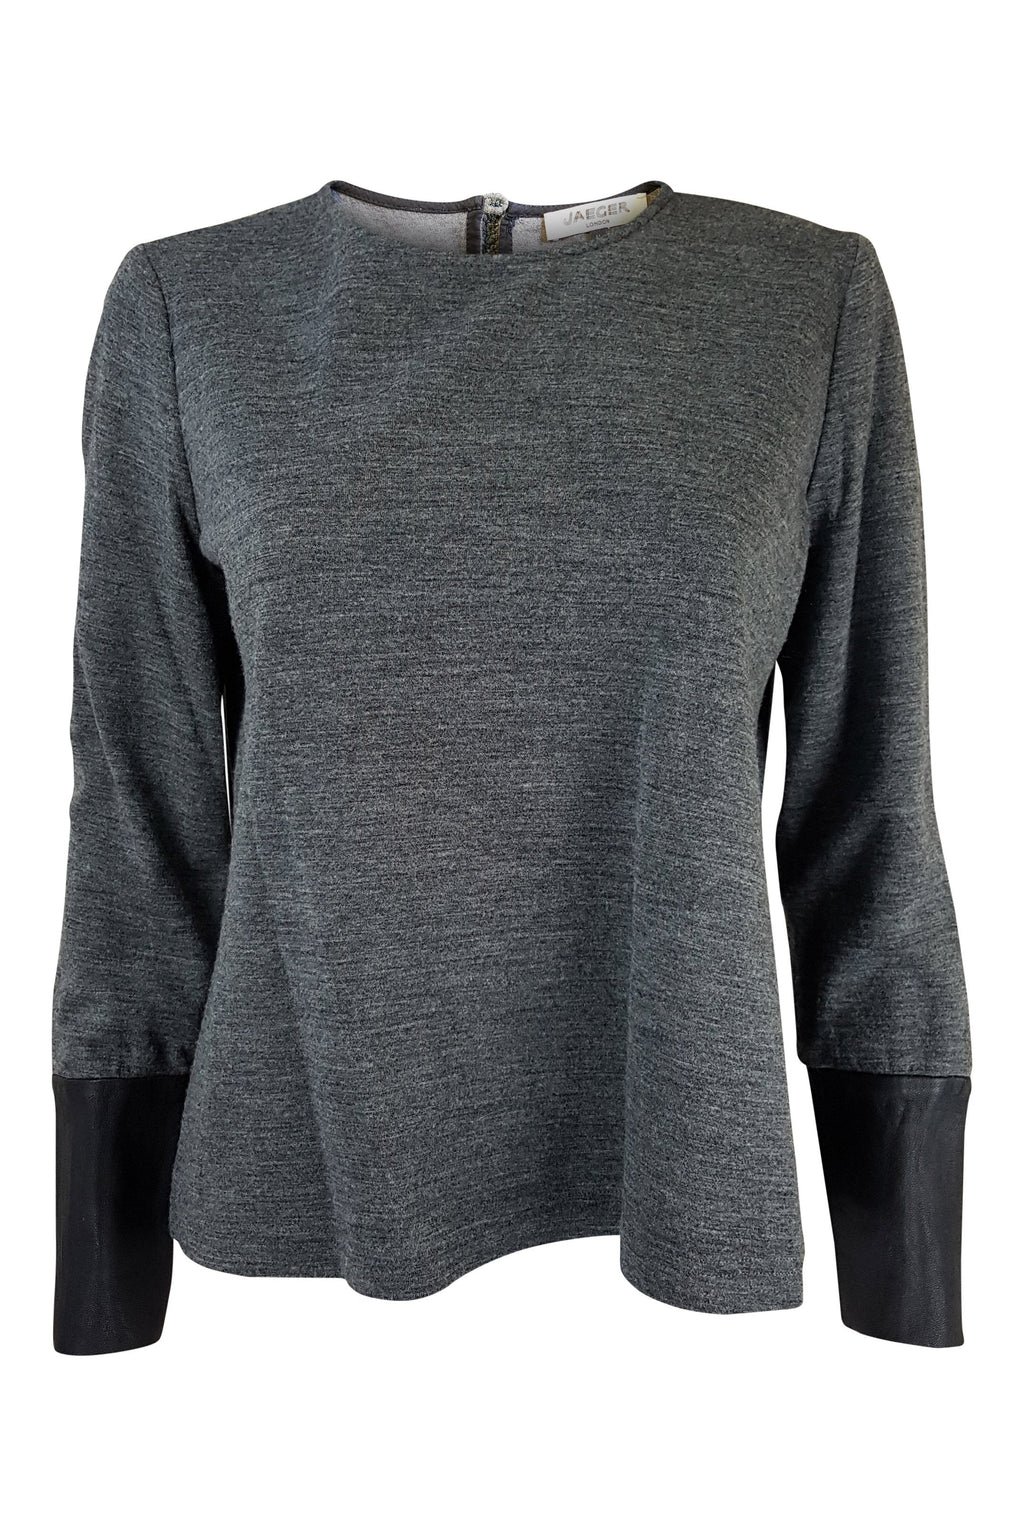 JAEGER Grey Long Sleeved Leather Cuff Top (M)-Jaeger-The Freperie